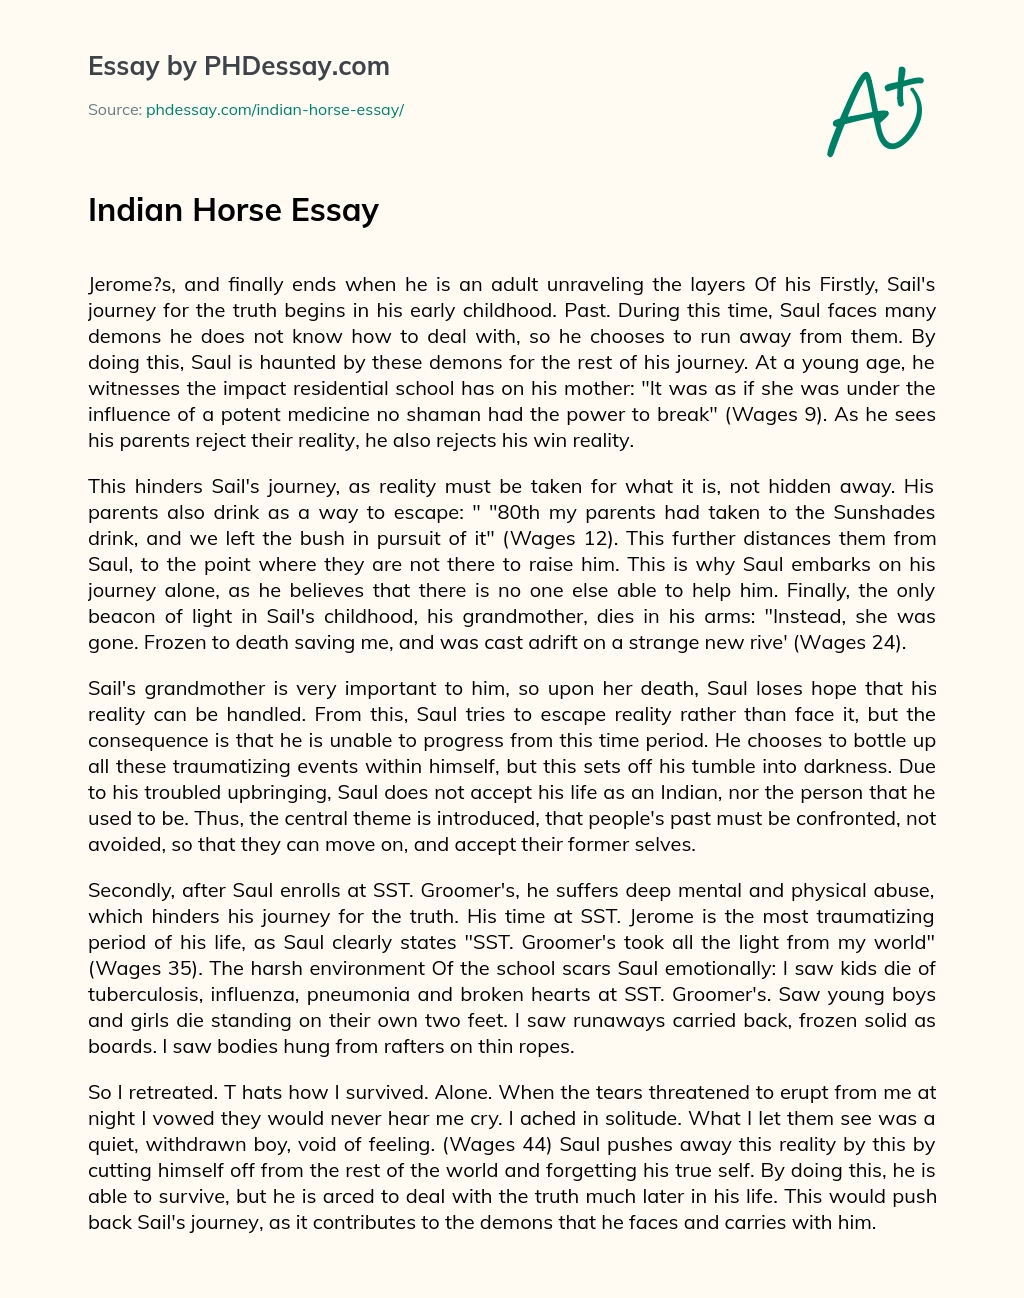 indian horse essay themes